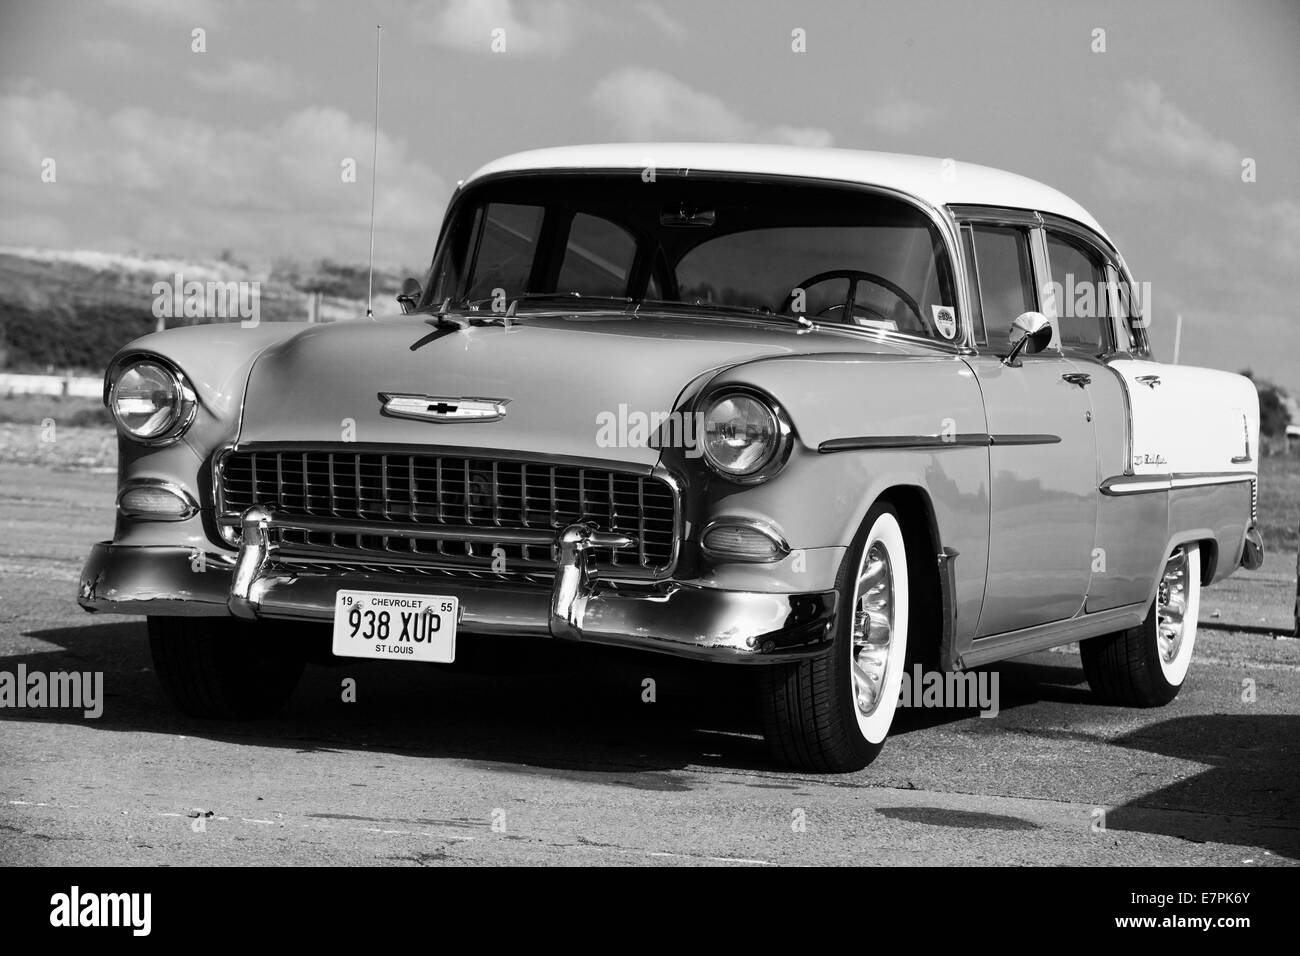 1955 Chevrolet. Chevy. Classic American car Black and White Stock Photo